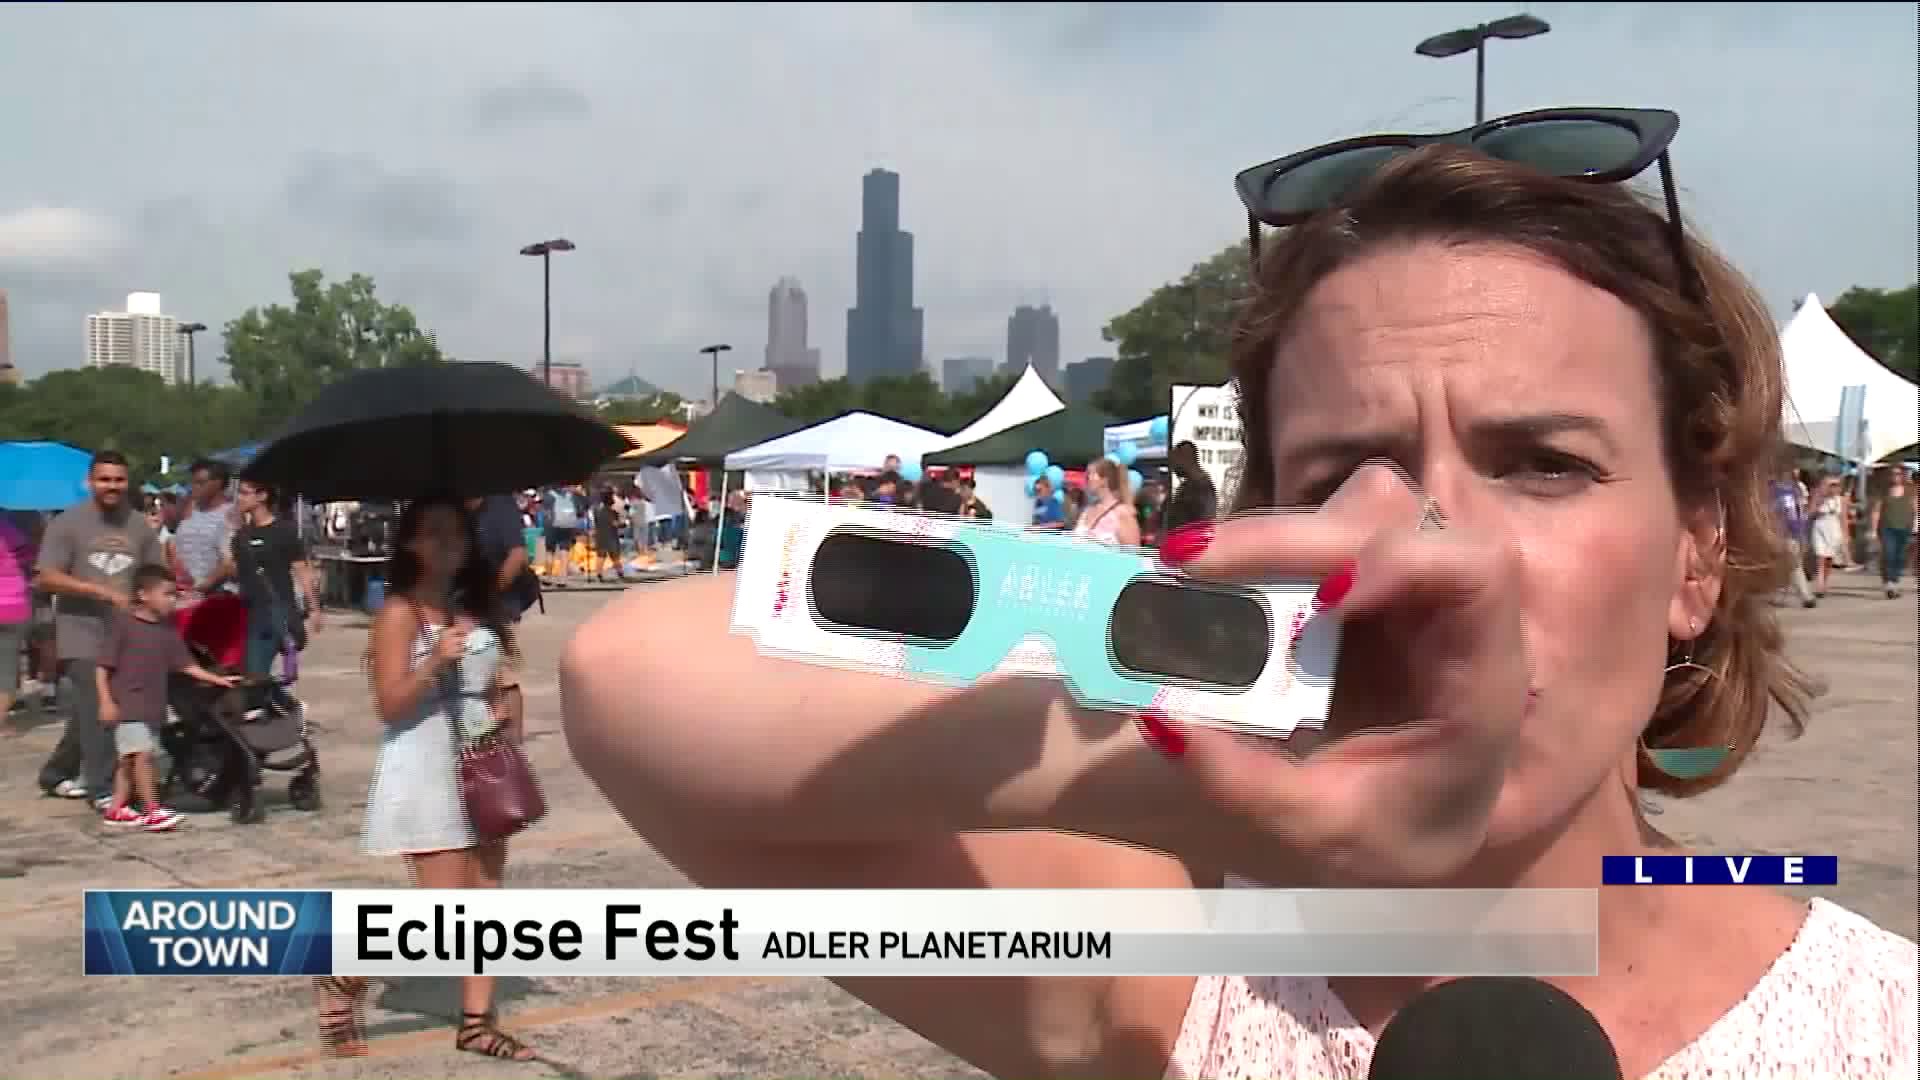 Around Town checks out the Eclipse Fest at the Adler Planetarium